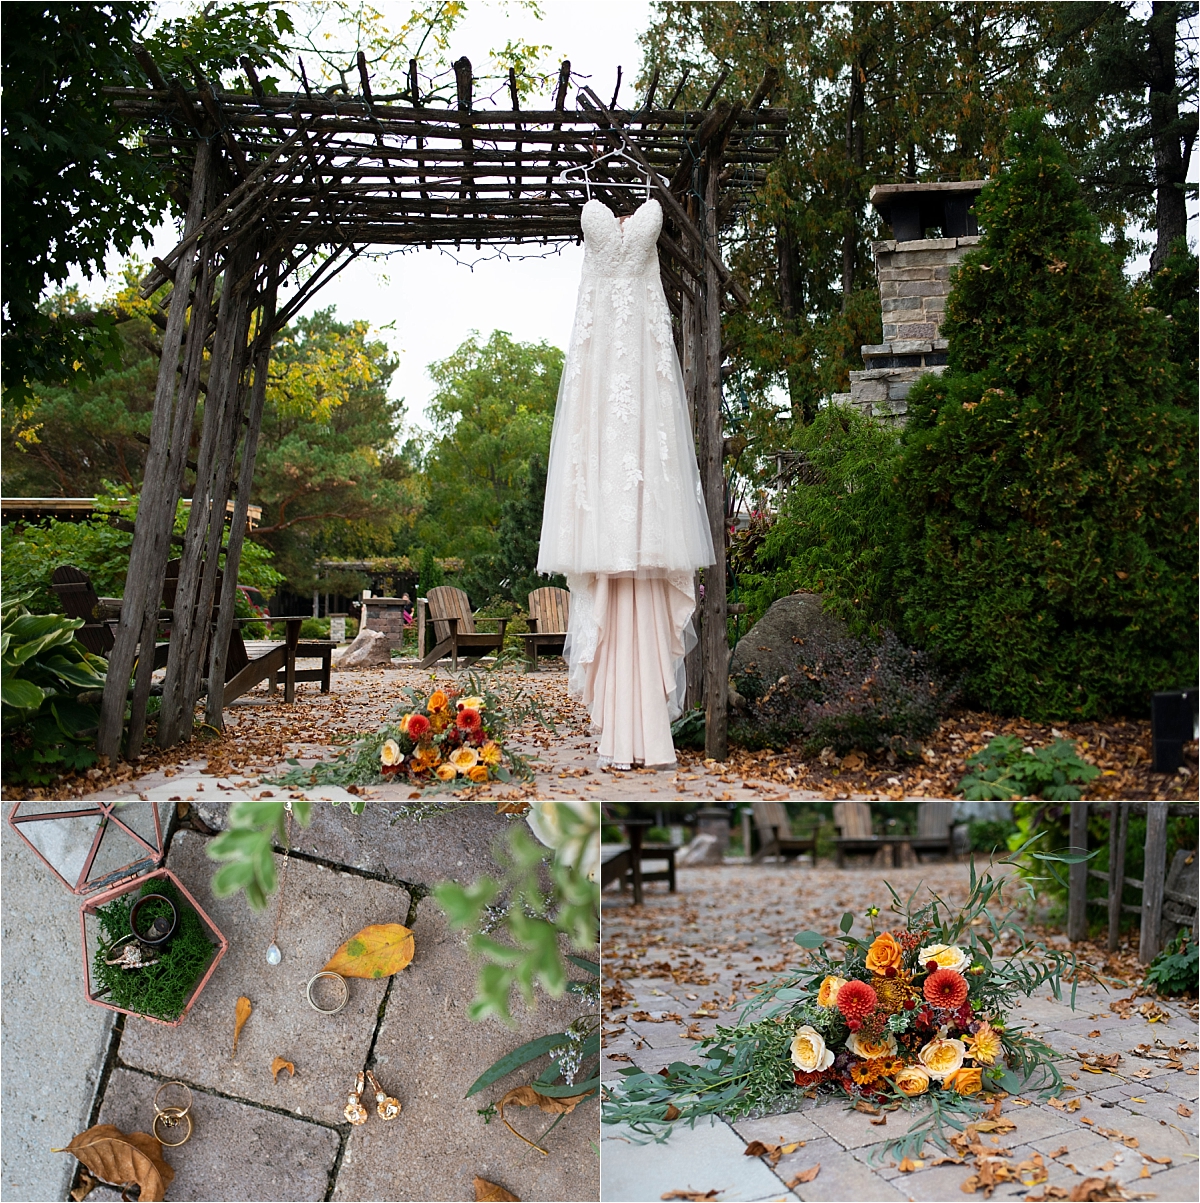 The Gardens of Castle Rock fall wedding dress and bouquet